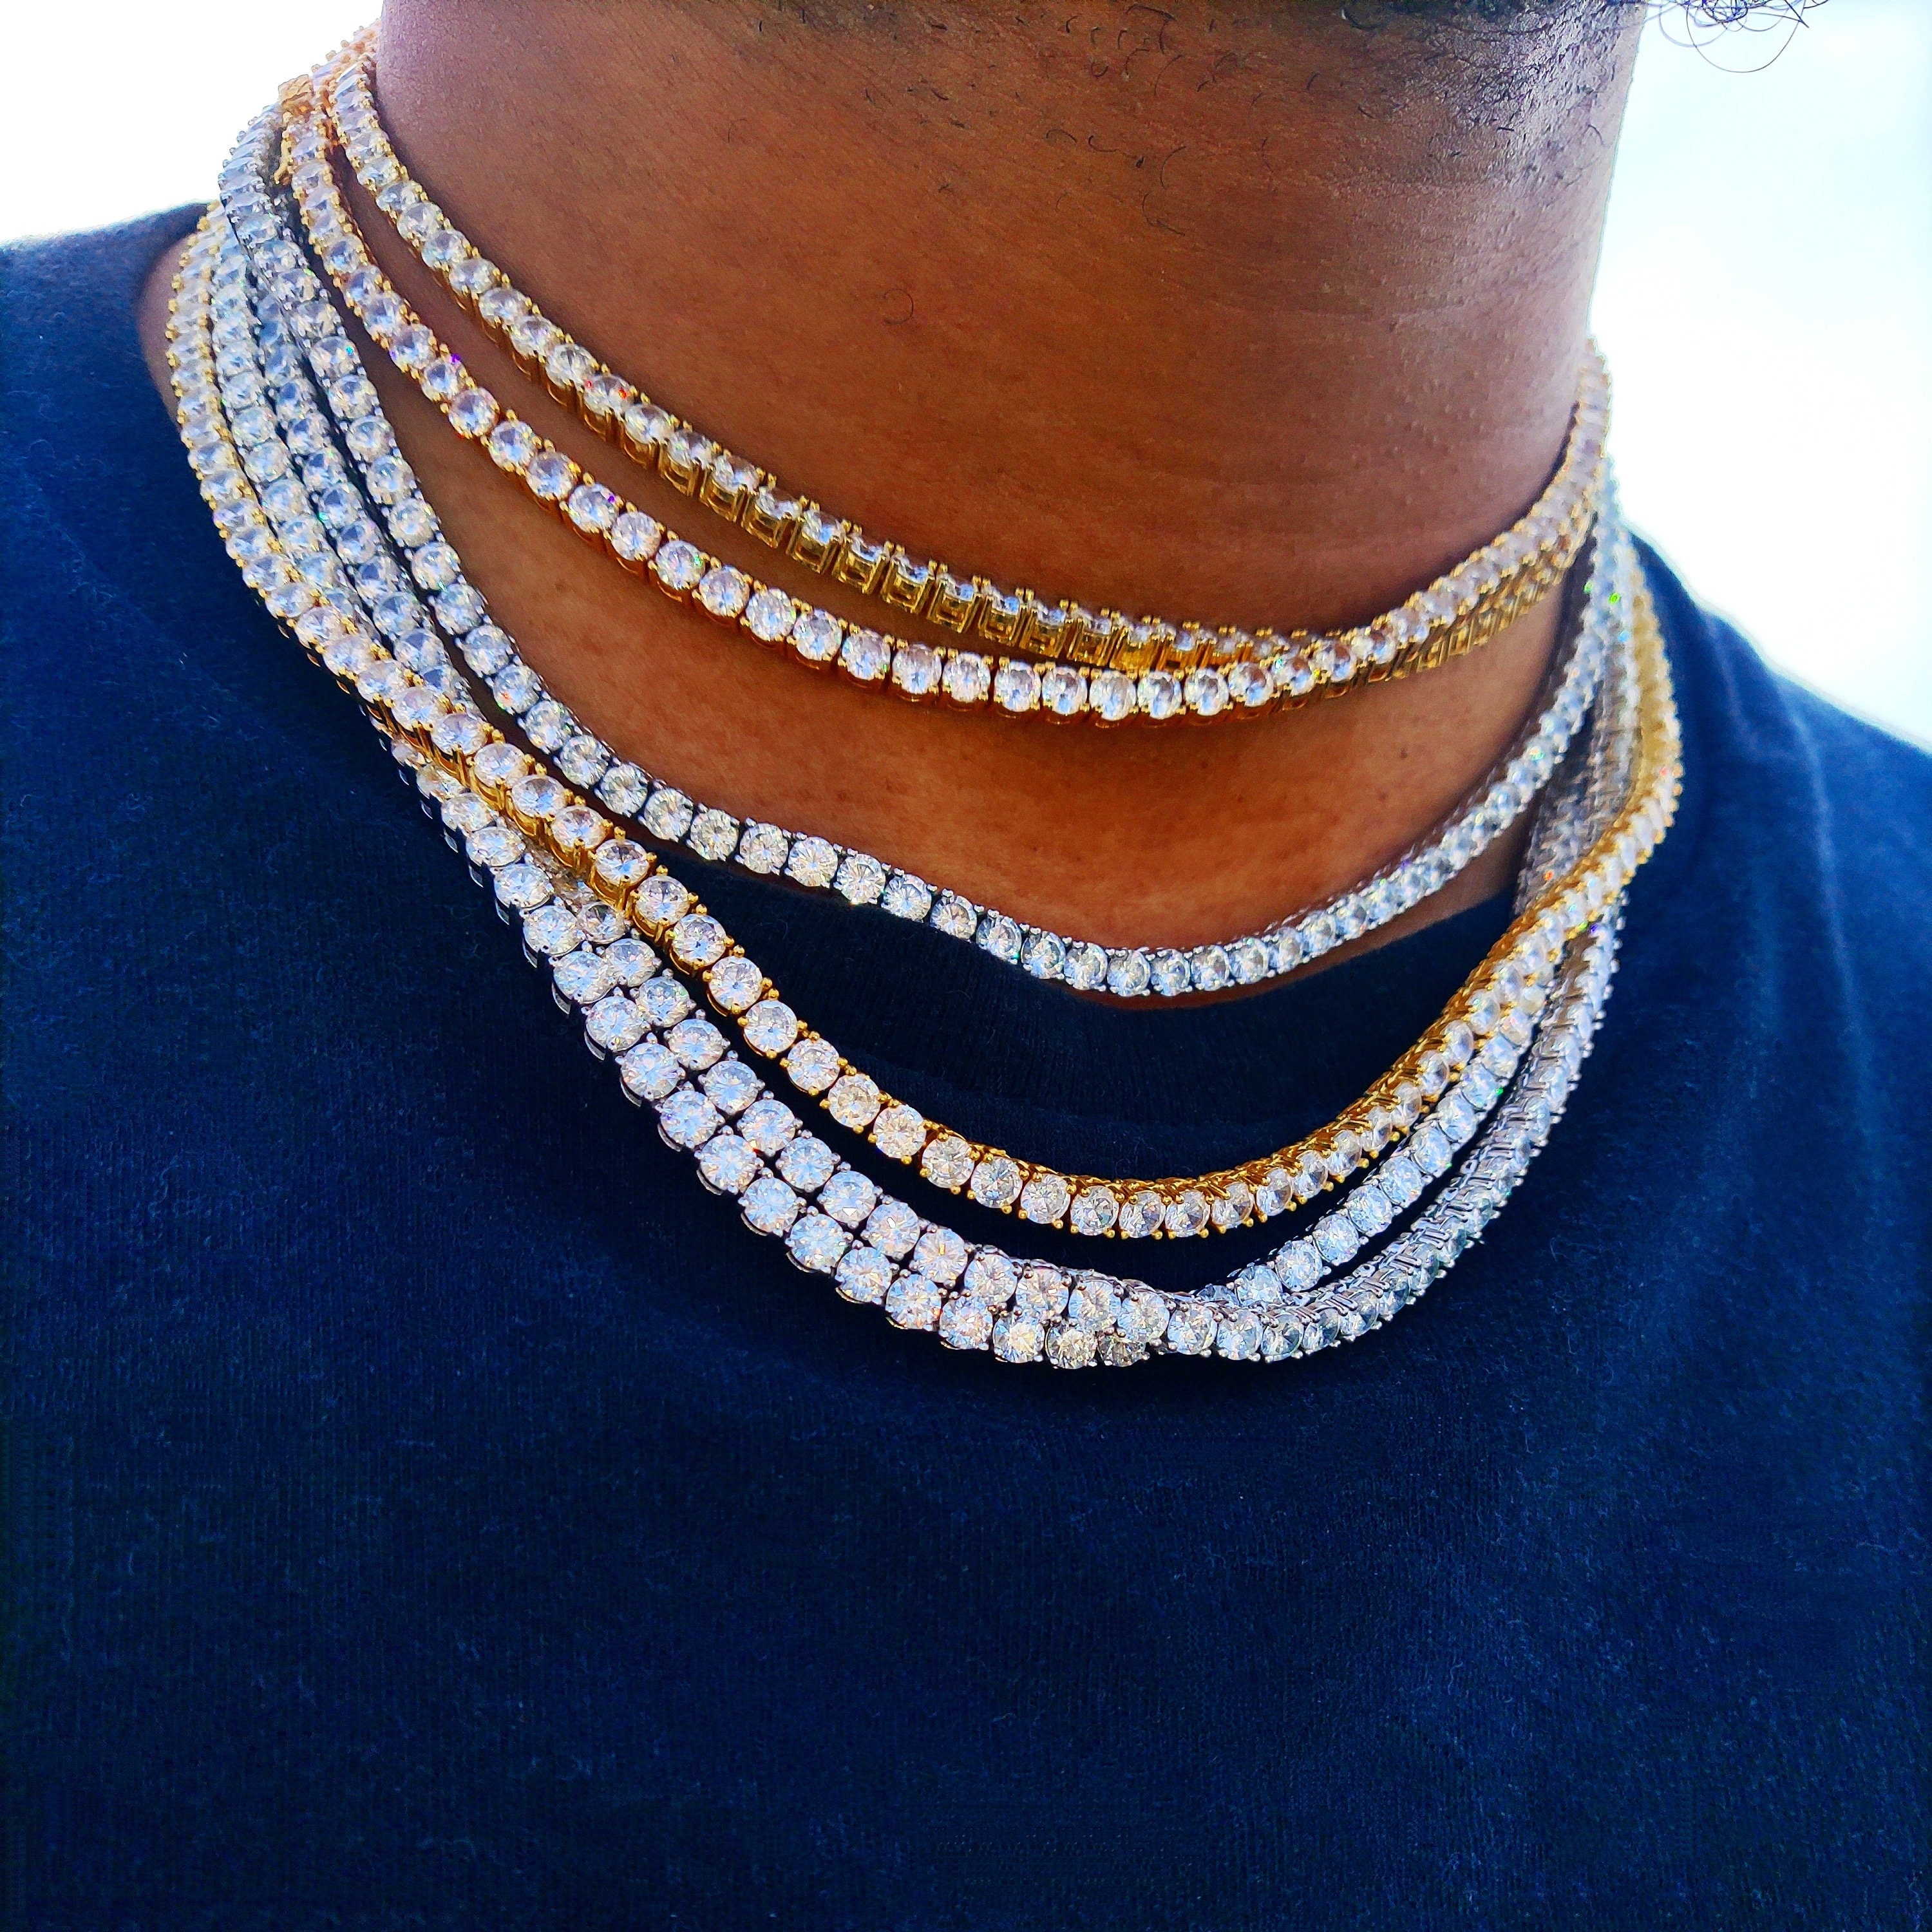 Halukakah Gold Chain for Men Iced Out,20MM Men's India | Ubuy